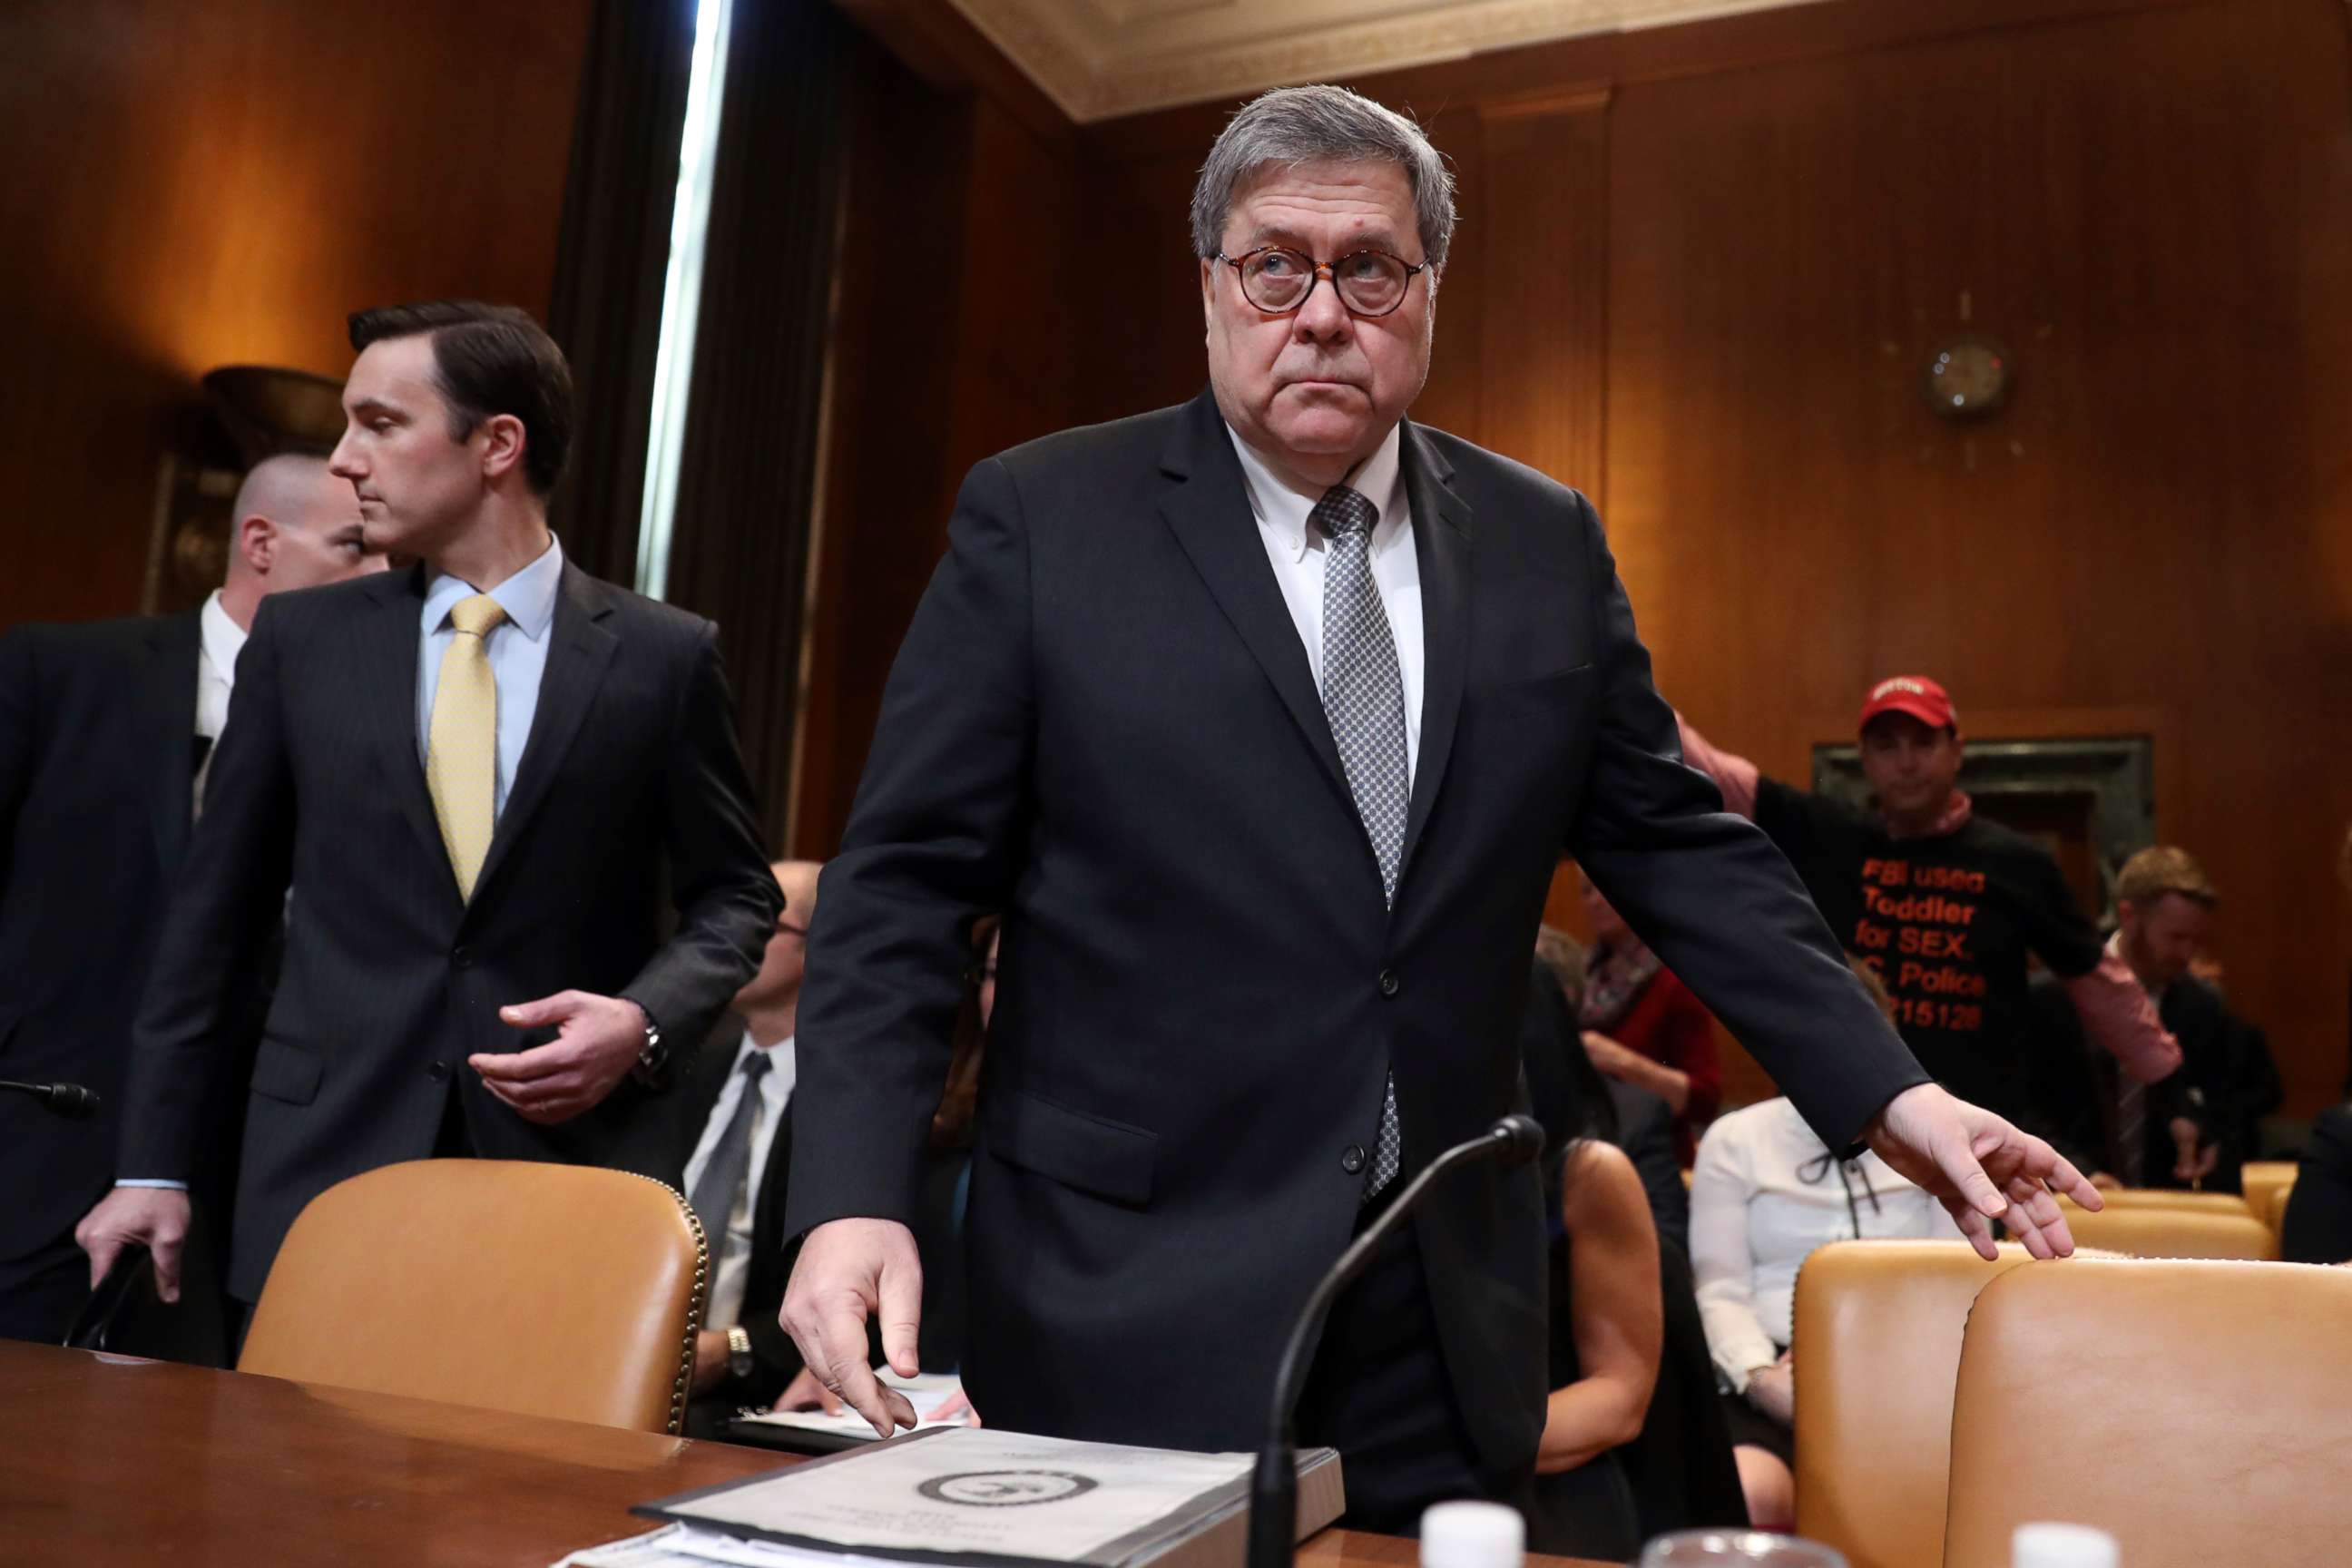 PHOTO: Attorney General William Barr arrives to appear before a Senate Appropriations subcommittee to make his Justice Department budget request, April 10, 2019, in Washington.